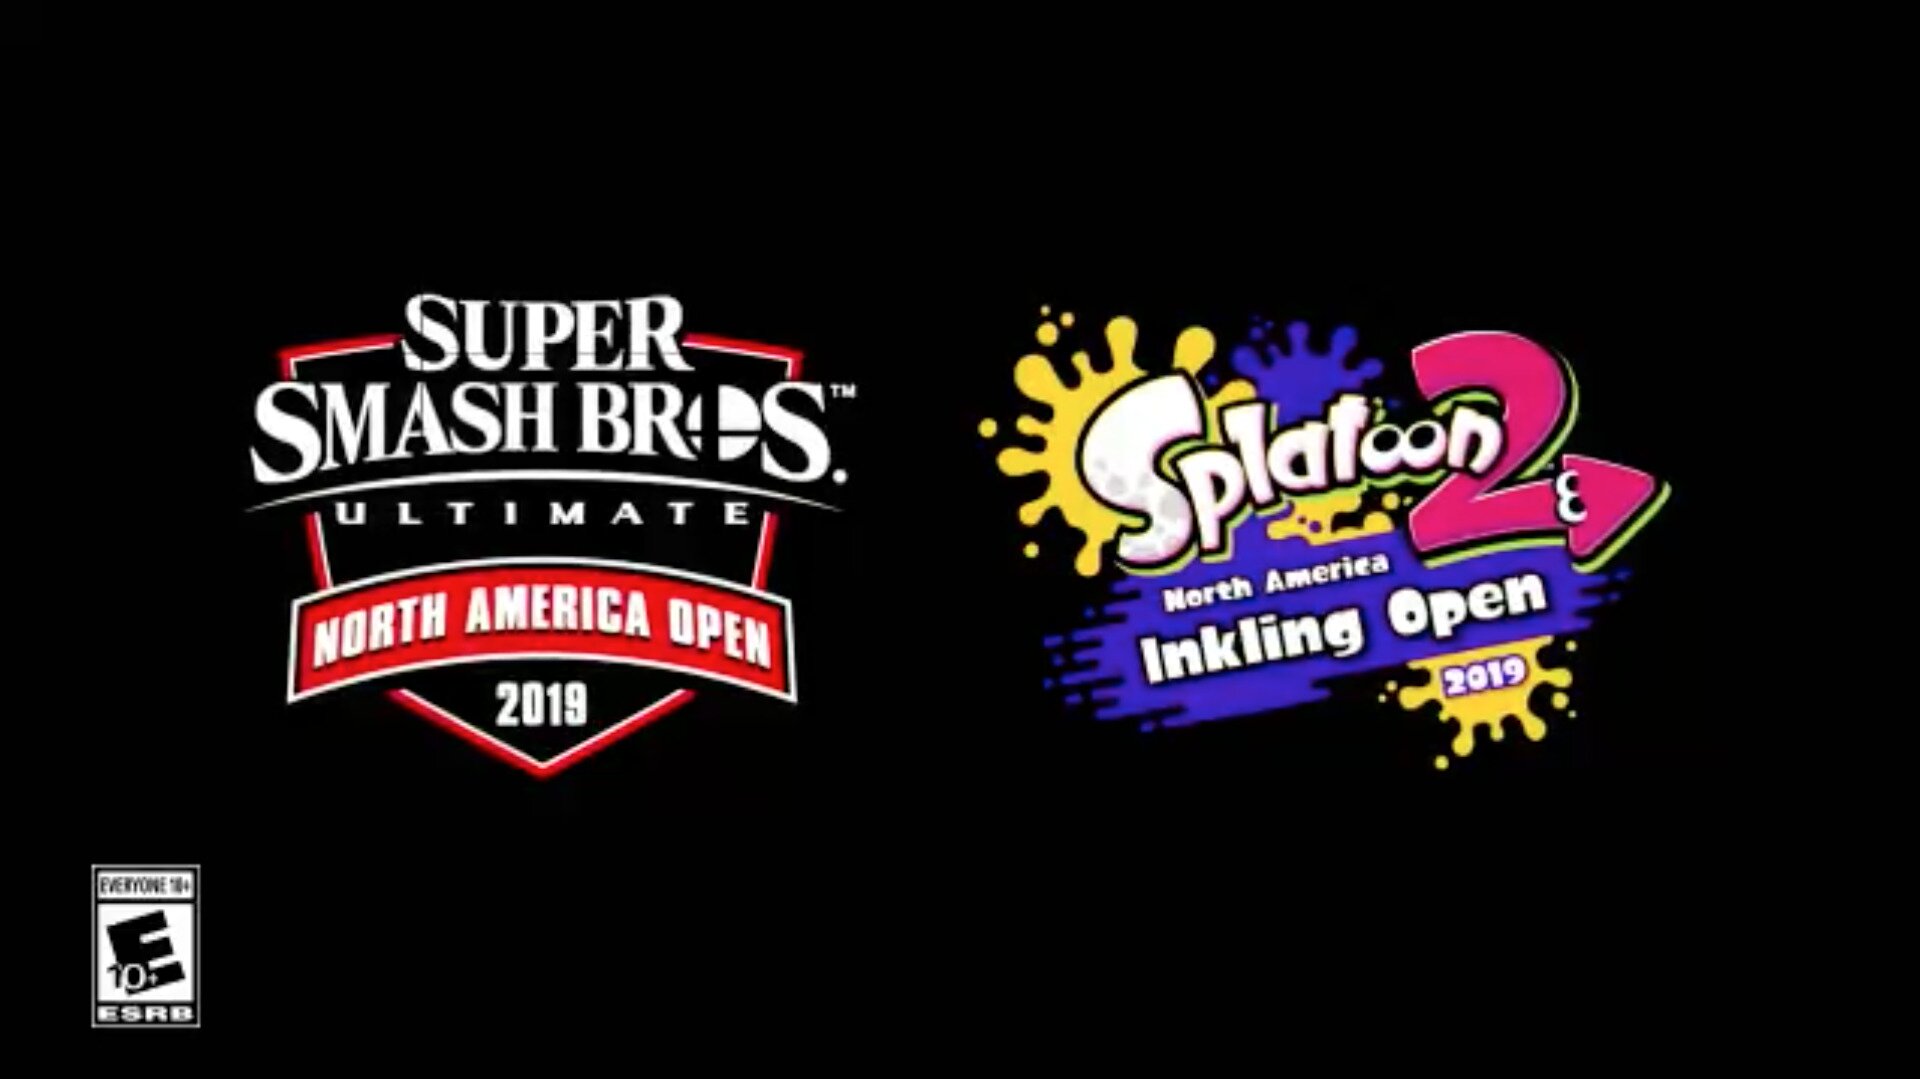 Nintendo of America has announced two qualifying competitions, one for Super Smash Bros. Ultimate and a second for Splatoon 2.